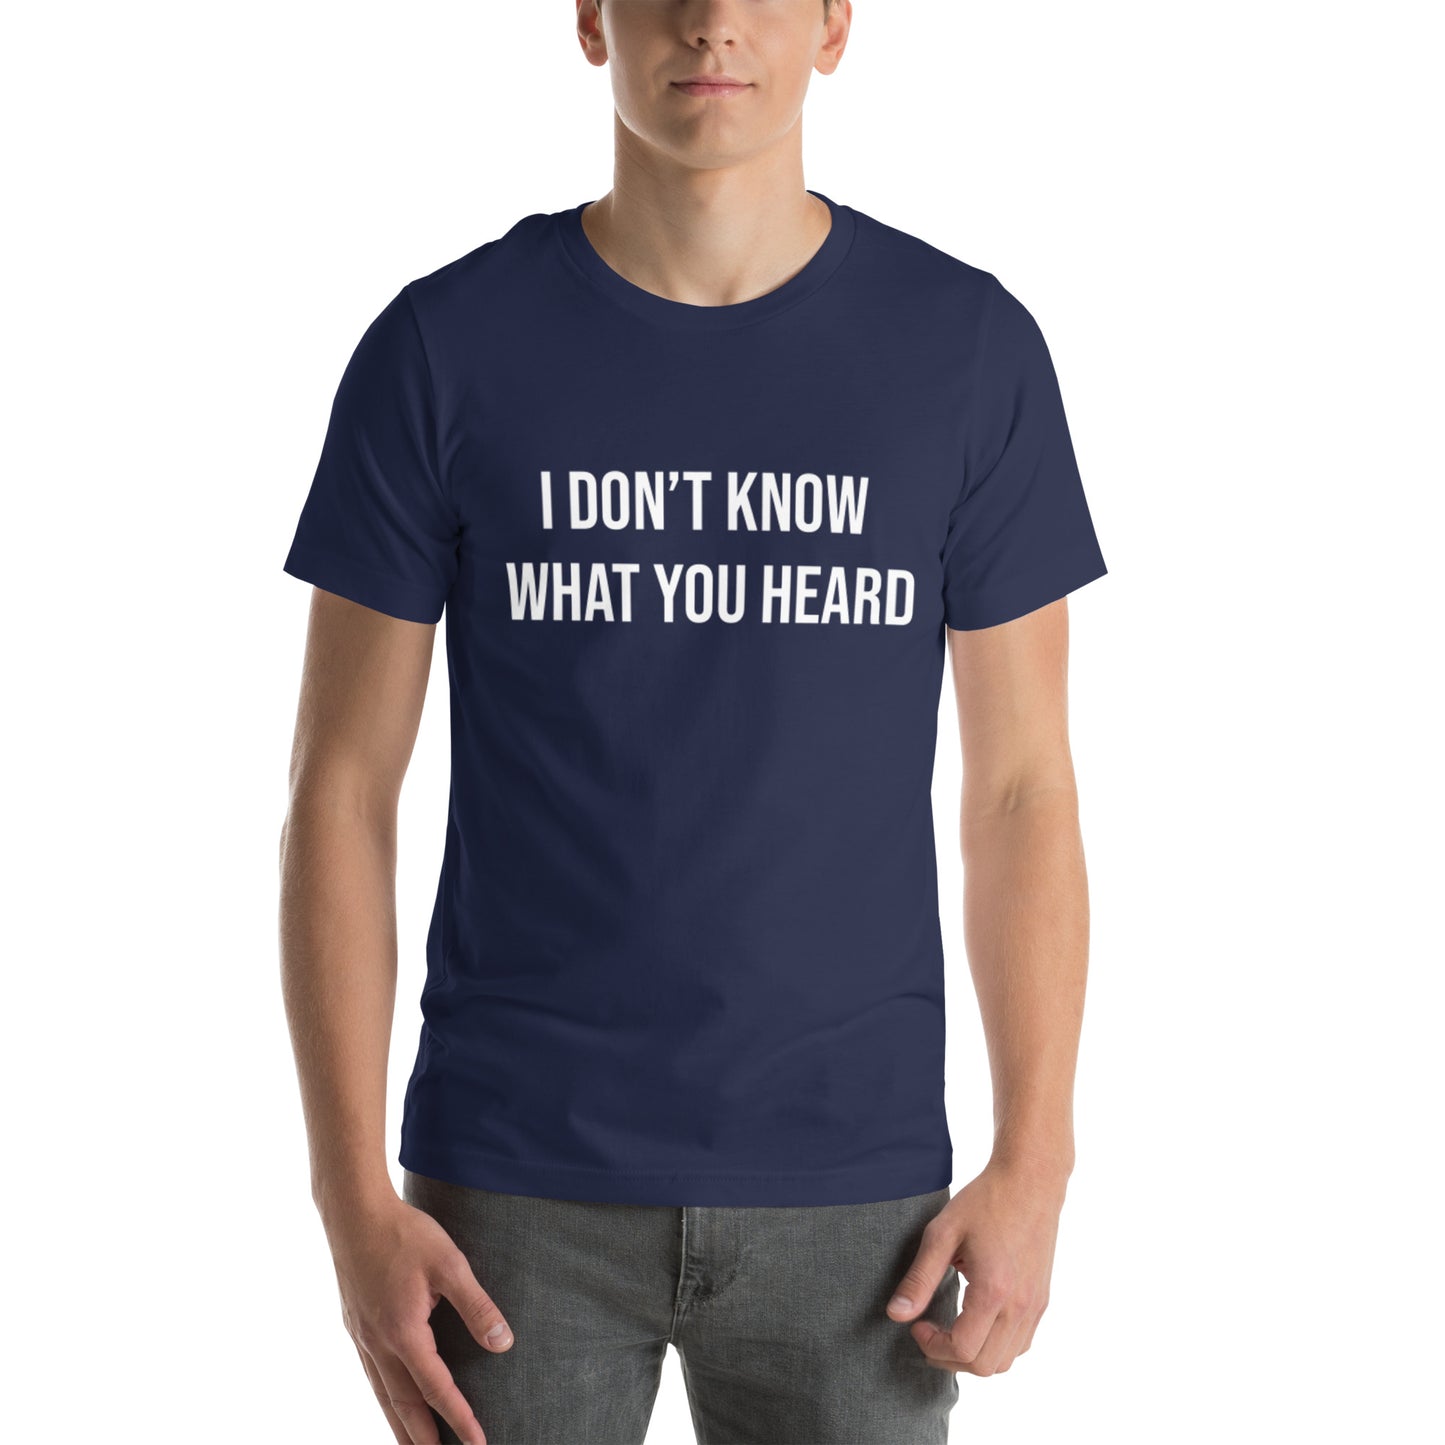 I DON’T KNOW WHAT YOU HEARD Unisex t-shirt